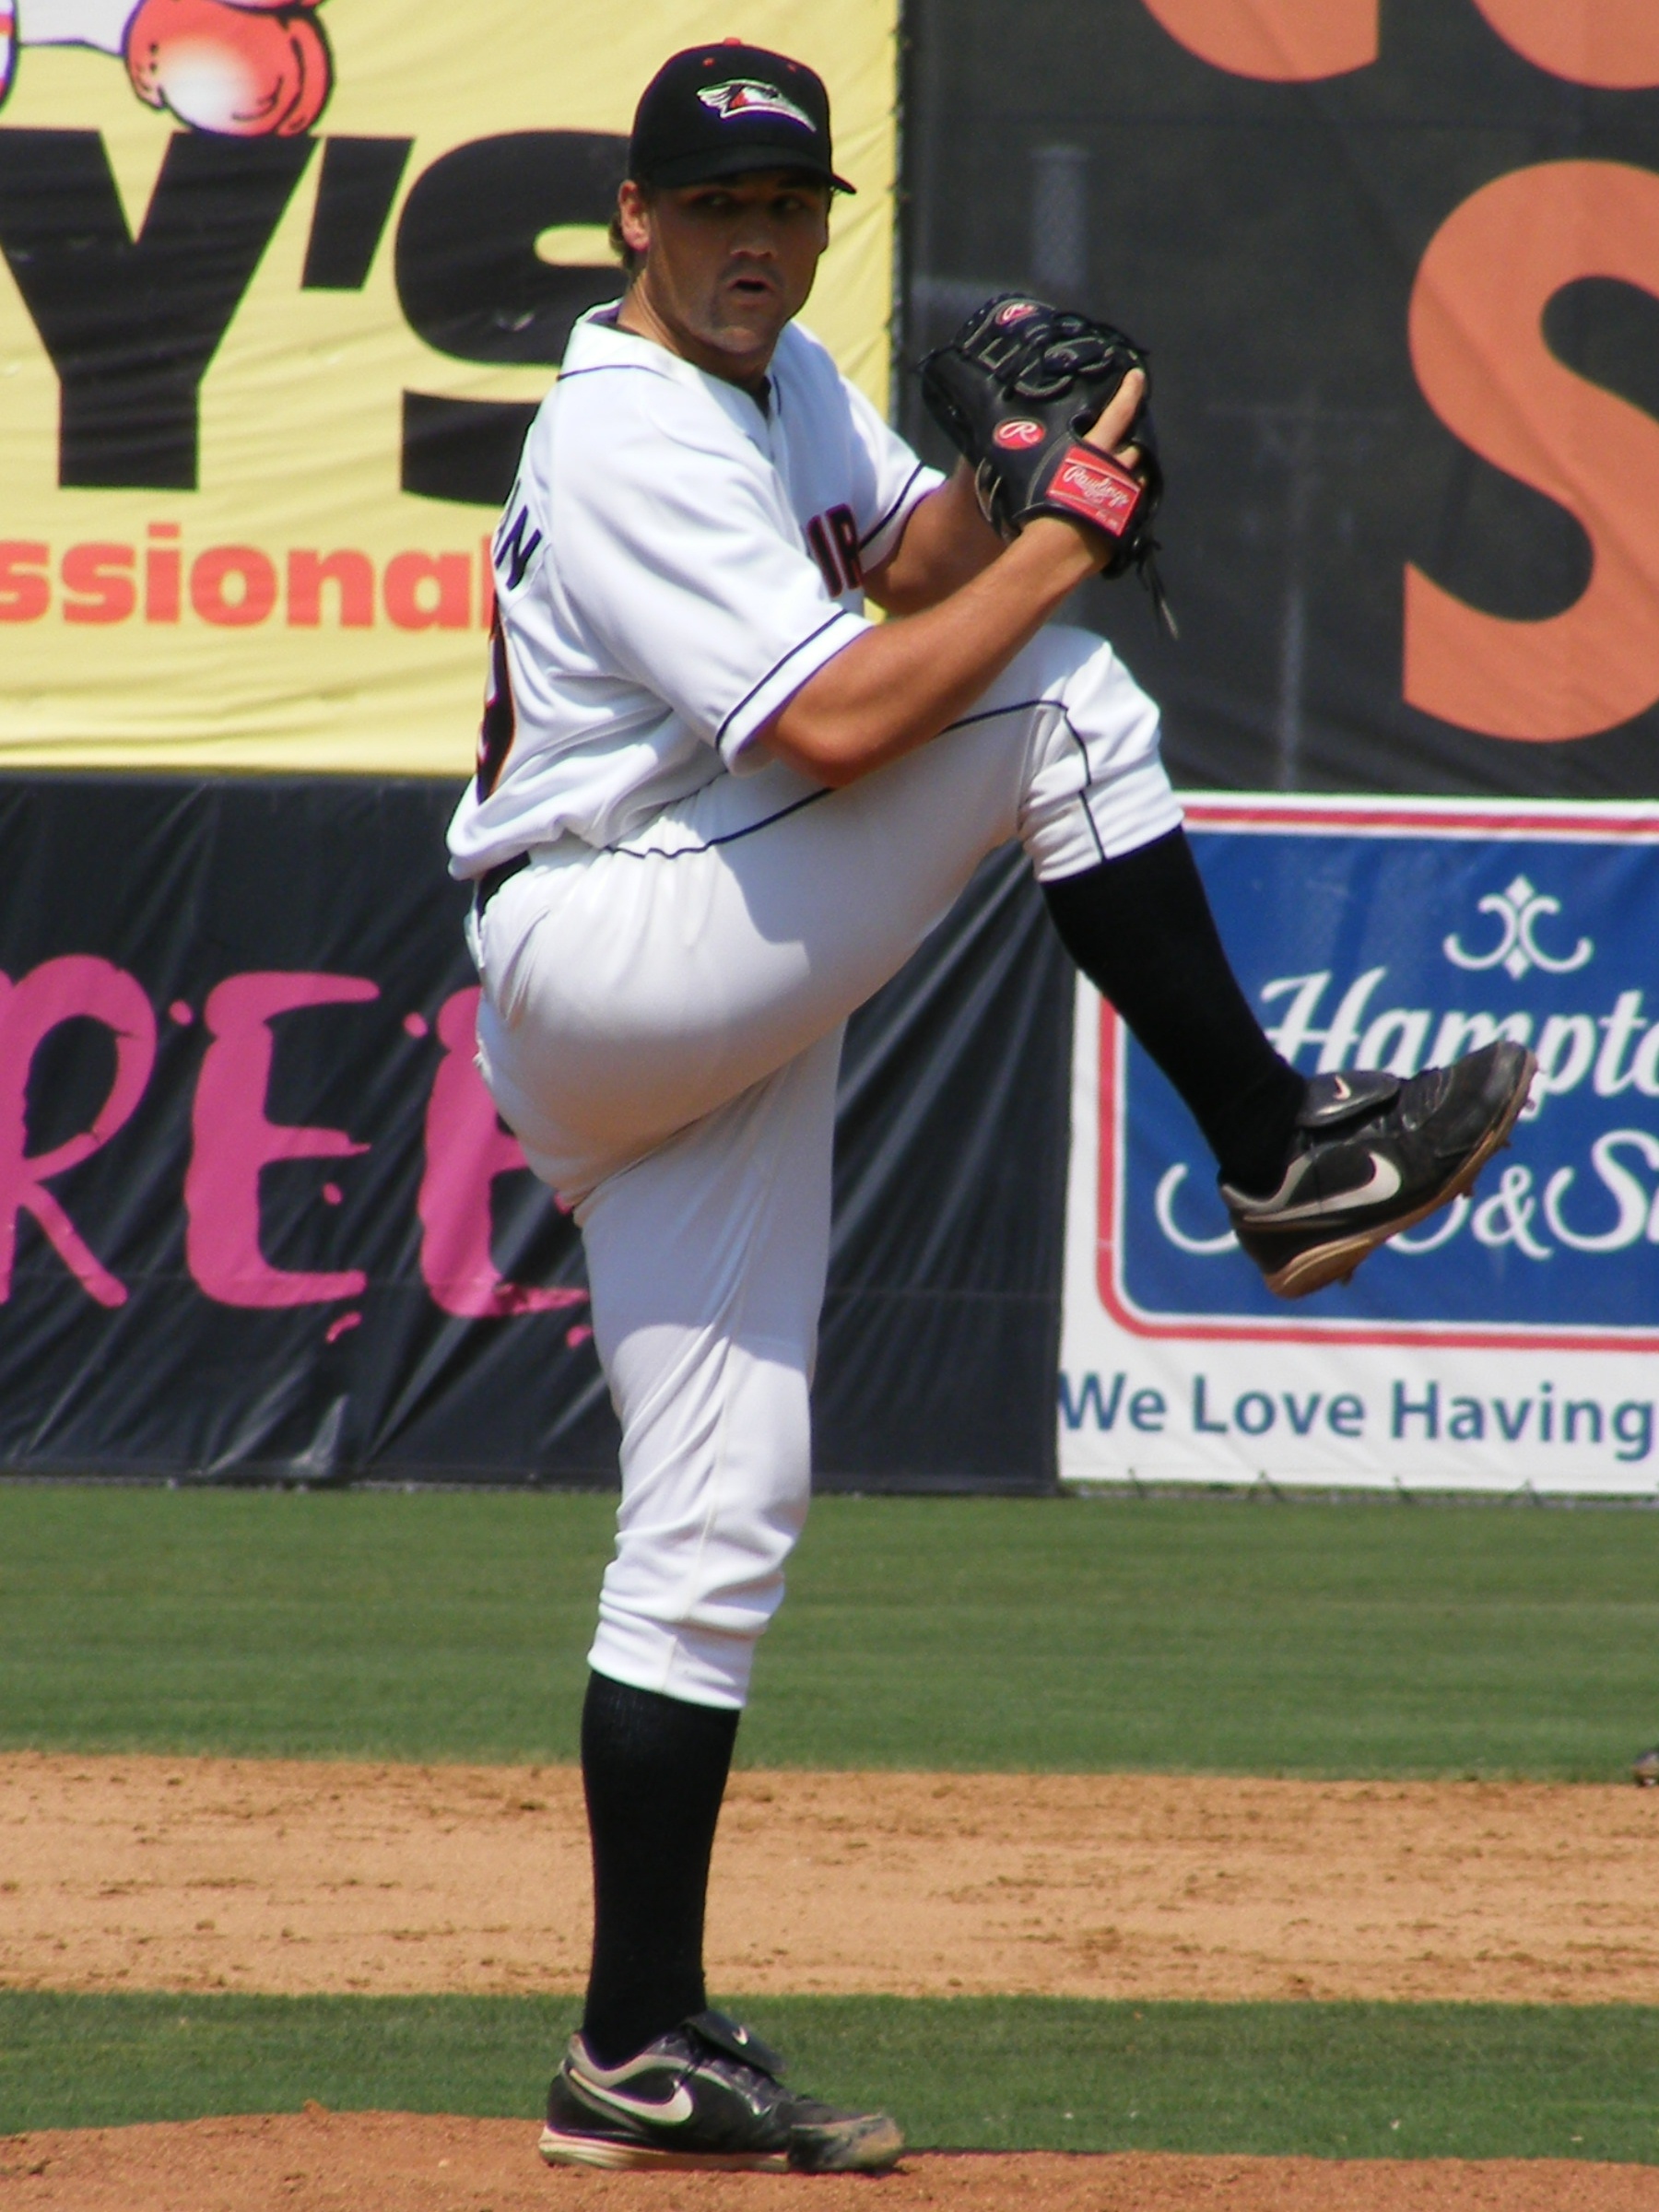 Nick Haughian's high leg kick makes for a good picture, and if it helps him pitch well that's an added bonus. This picture was taken back on June 20th as the Shorebirds closed out the first half against Lexington.